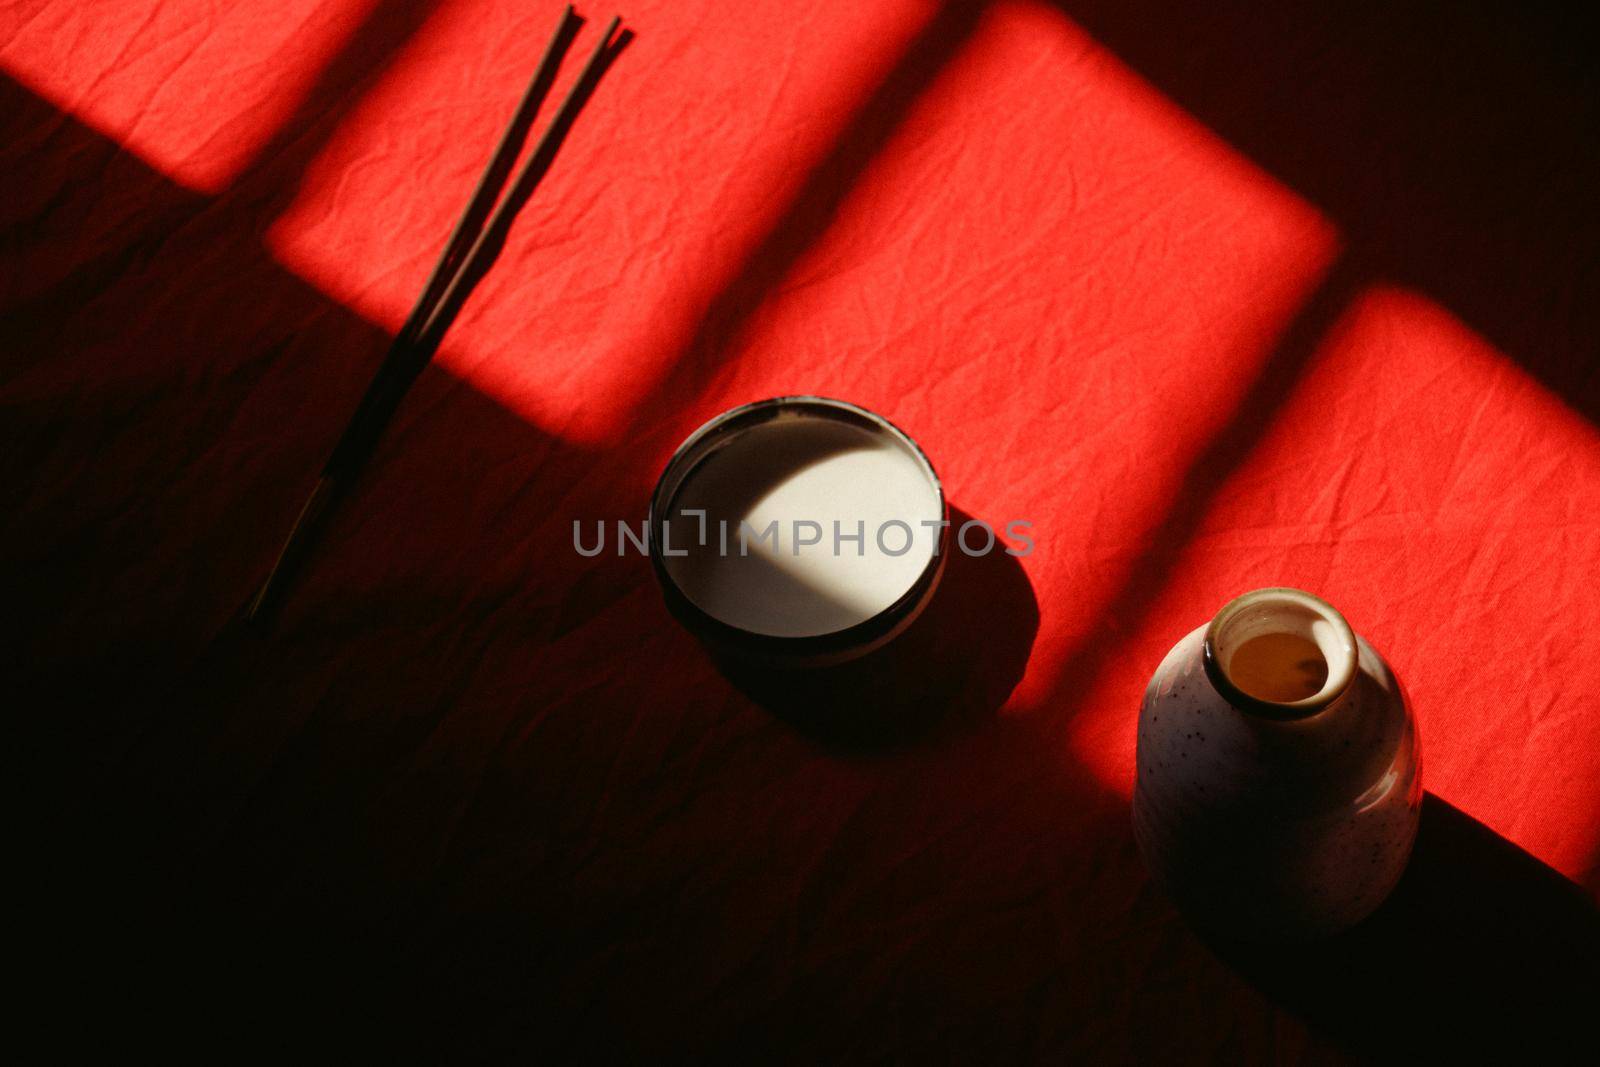 Light and shadows cast on ceramic incense holder showing the concept of mindfulness, tranquility and life balance